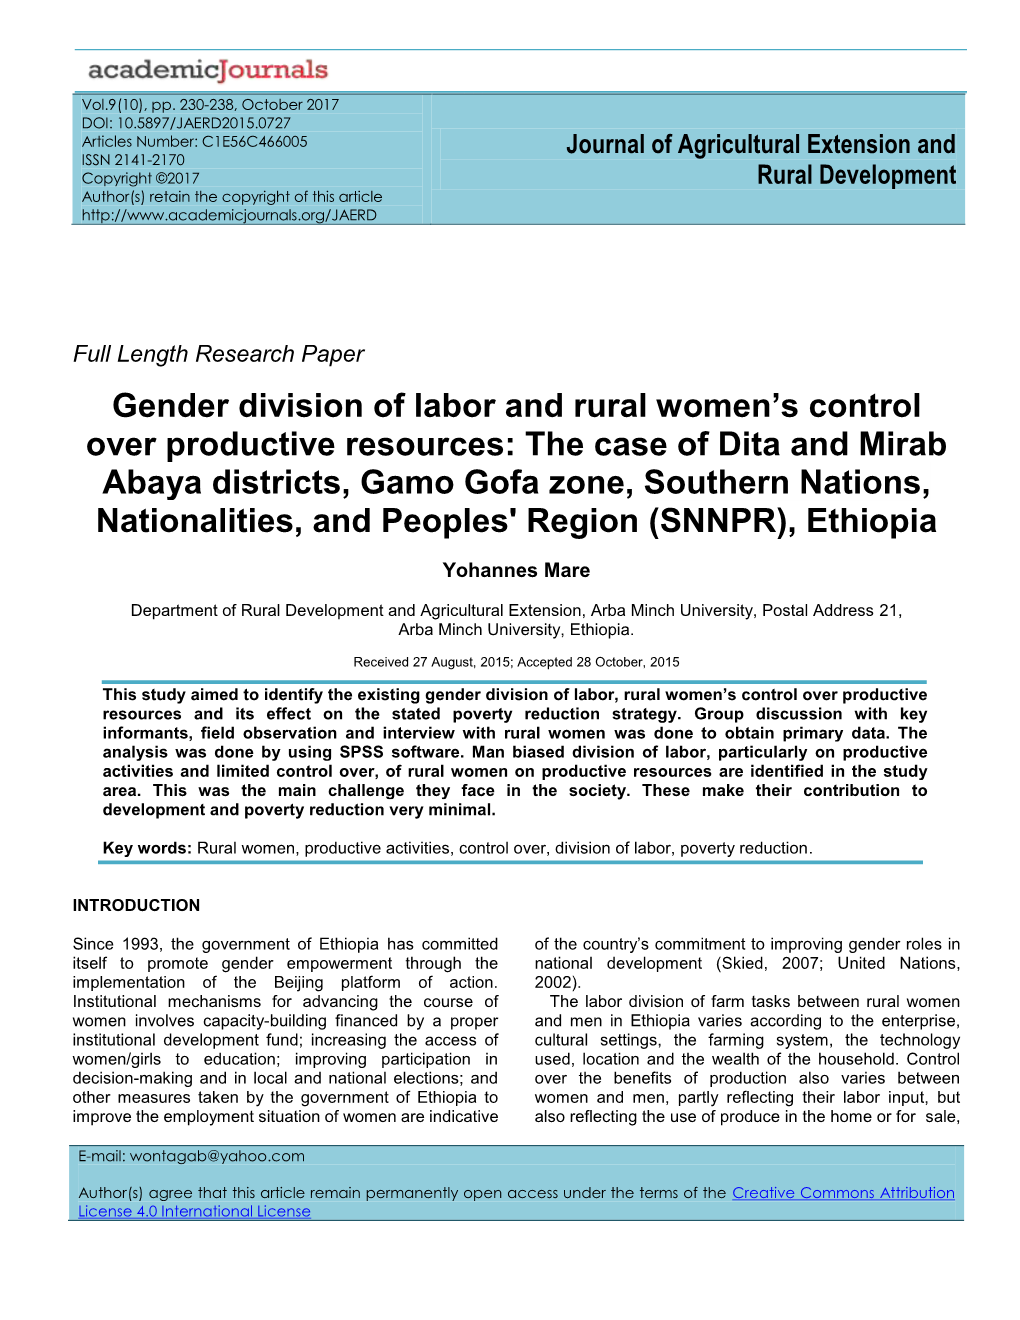 Gender Division of Labor and Rural Women's Control Over Productive